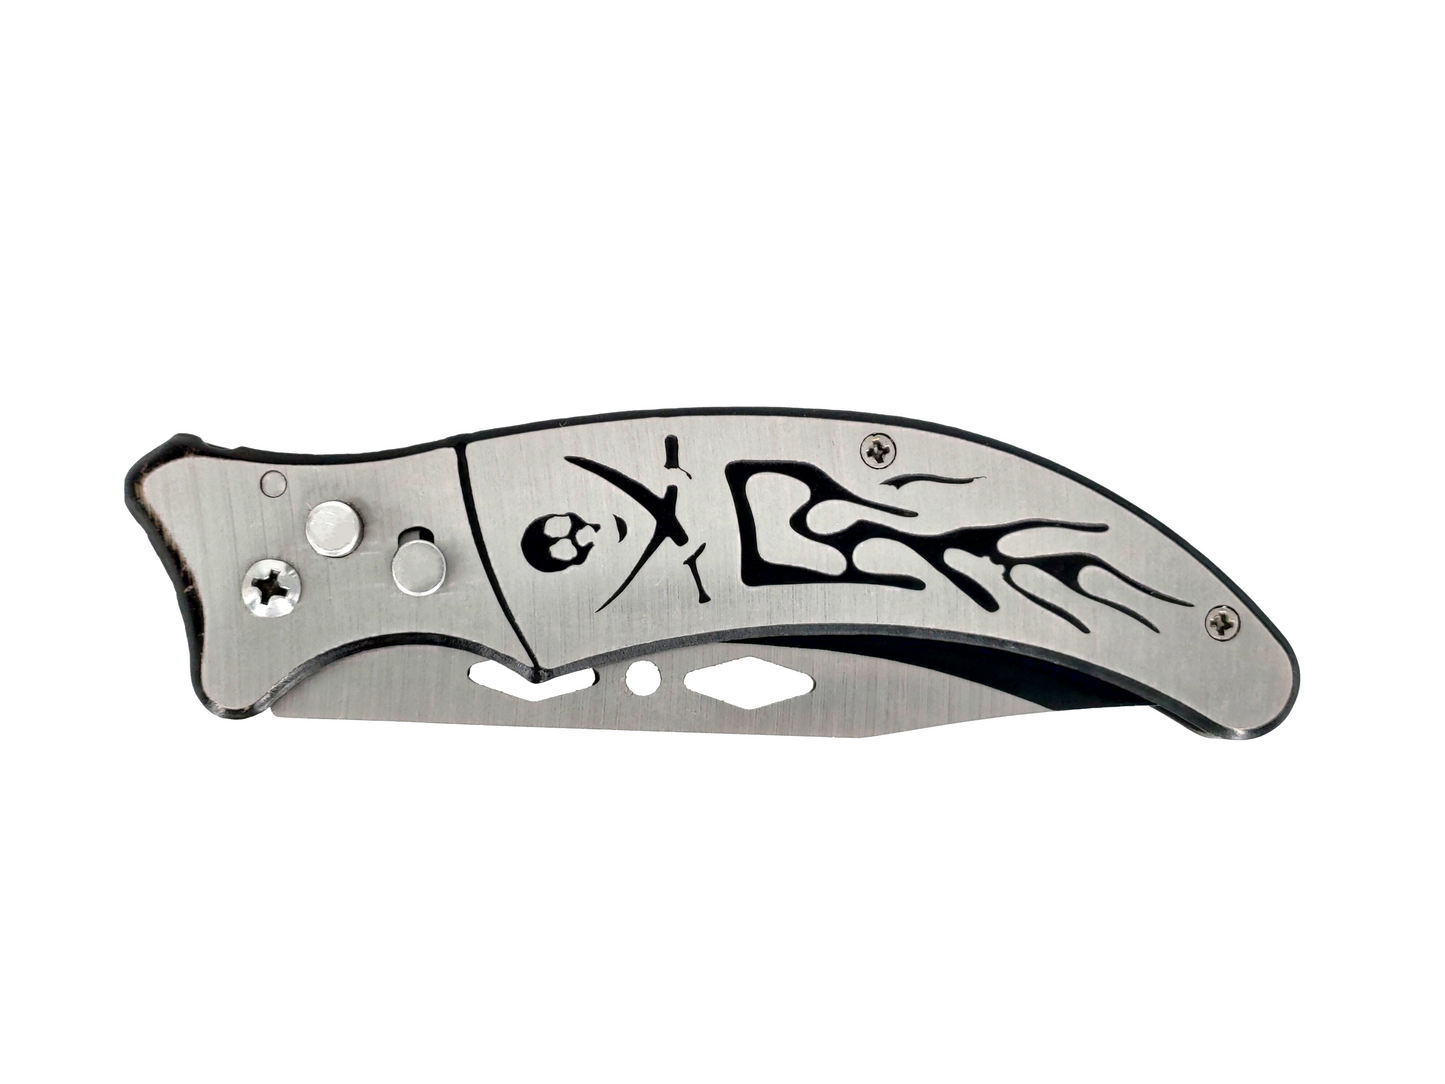 BLACK AND SILVER SKELETON ENGRAVED FOLDING KNIFE WITH SAFETY LOCK